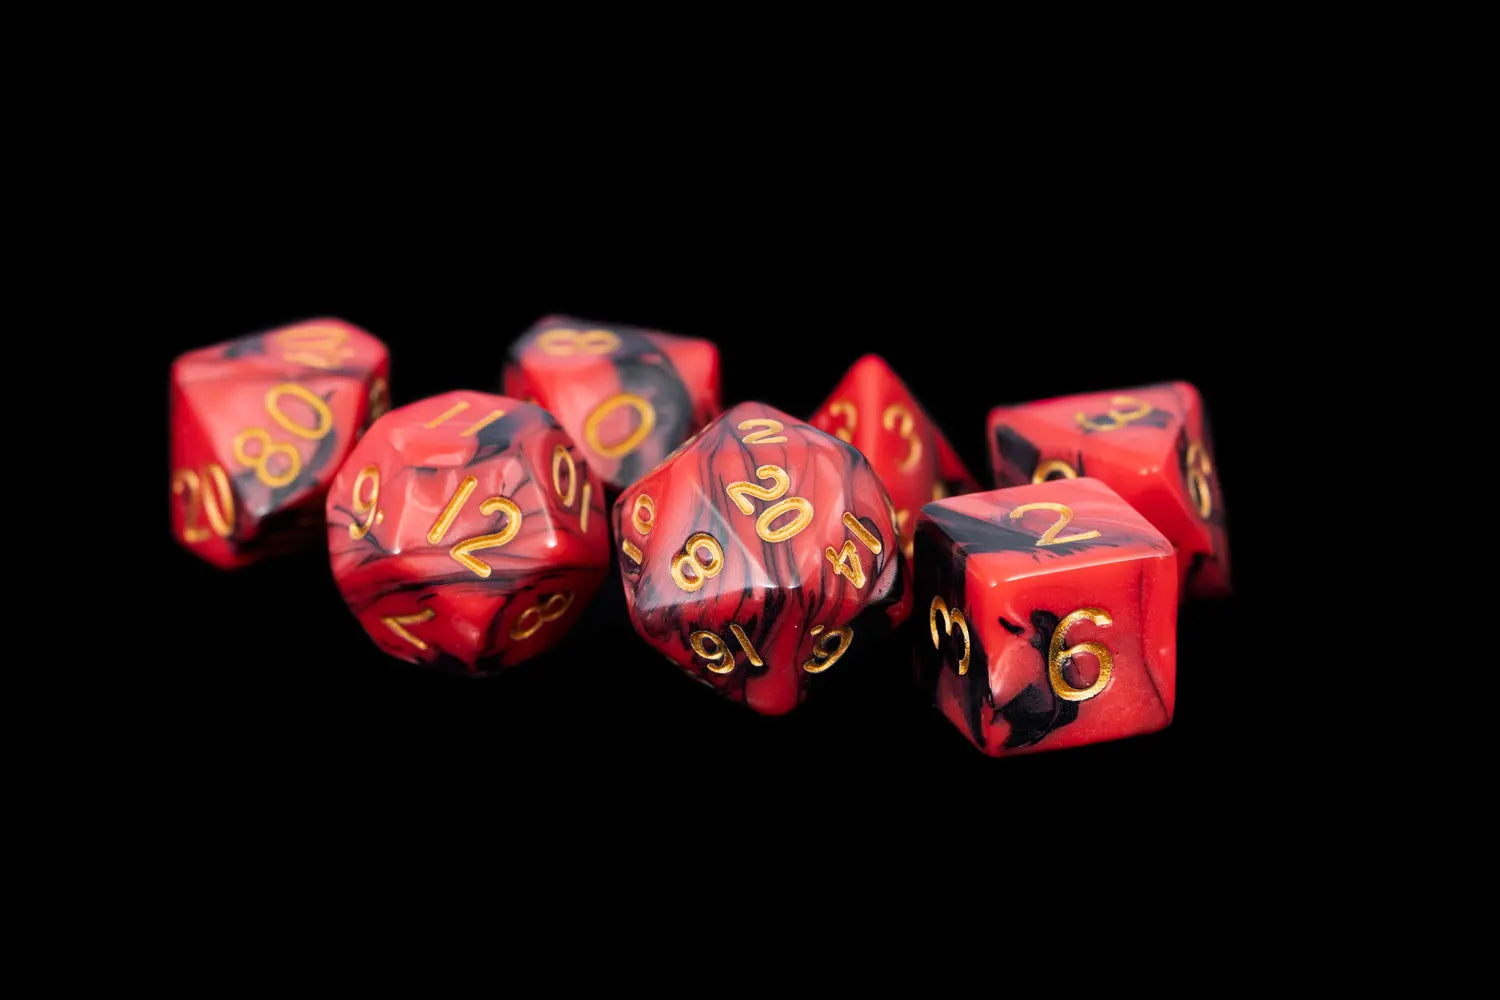 MDG: 16mm Polyhedral Dice Set - Black and Red Marble with Gold Numbers